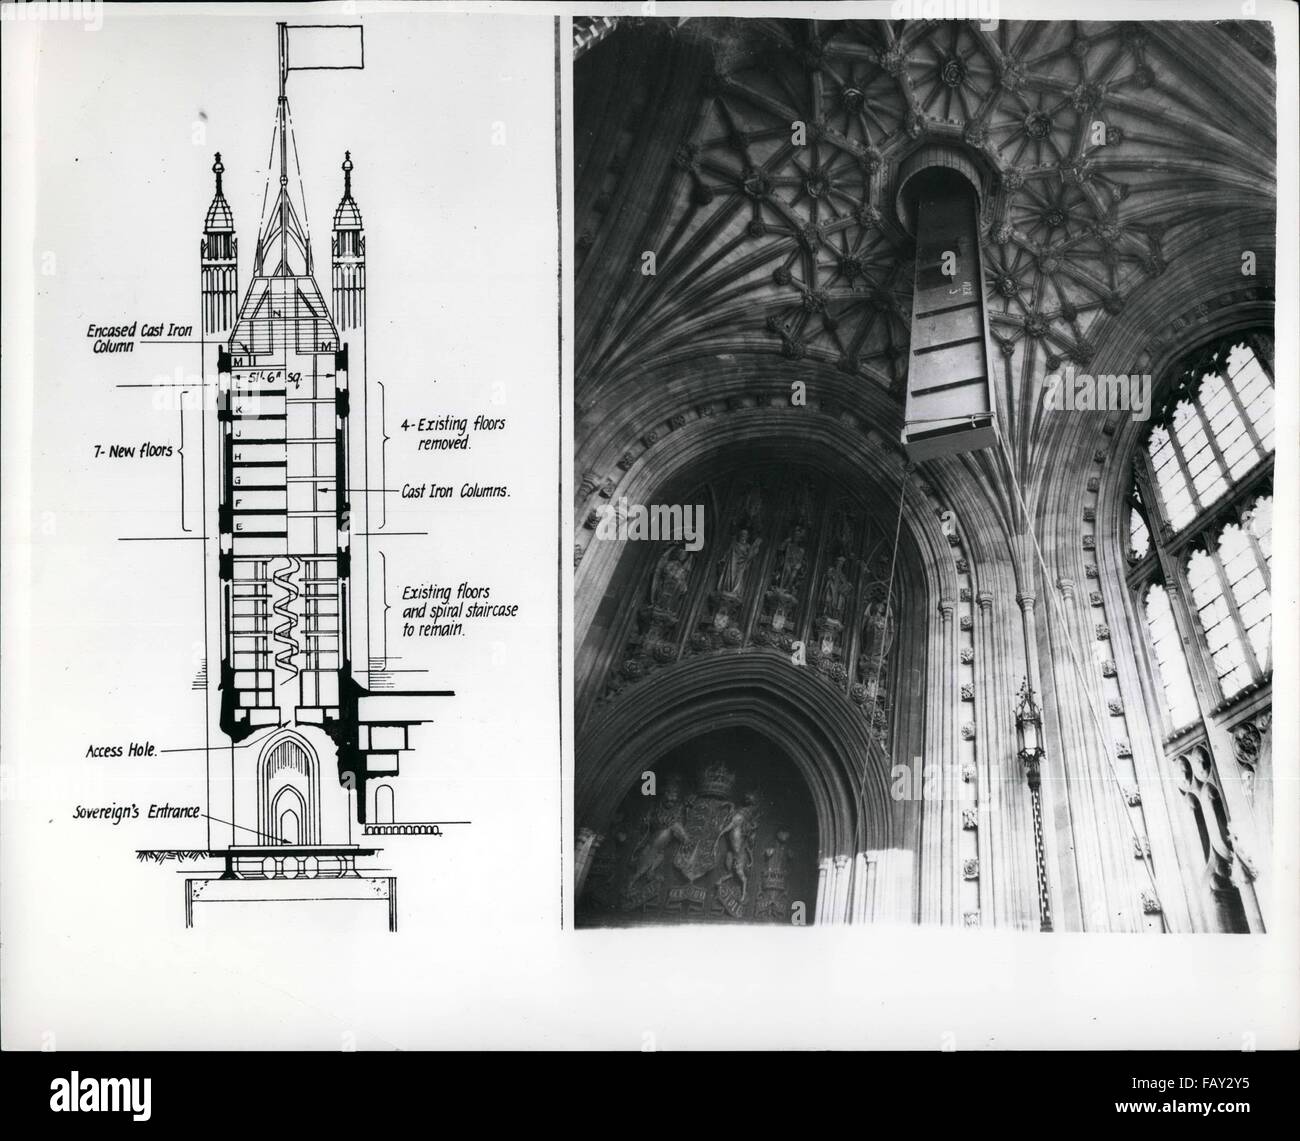 1972 - Major Structurel Alterations Inside Te Victoria Tower Seven New Floors For Storage Space: A ramarkable and intricate structiural alteration is now being carried out inside the famous Victoria Tower Of the House of Parliament. The Tower which is 360 feet high - was built over 100 years ago by Sir Charles Barry and is one of the largest square manor towers in the world -- and it has been transformed internally to provide 17,0000 square feet of modern storage accommodation for the unique accumulation of Parliamentary Records of one and a half million documents and books including the origi Stock Photo